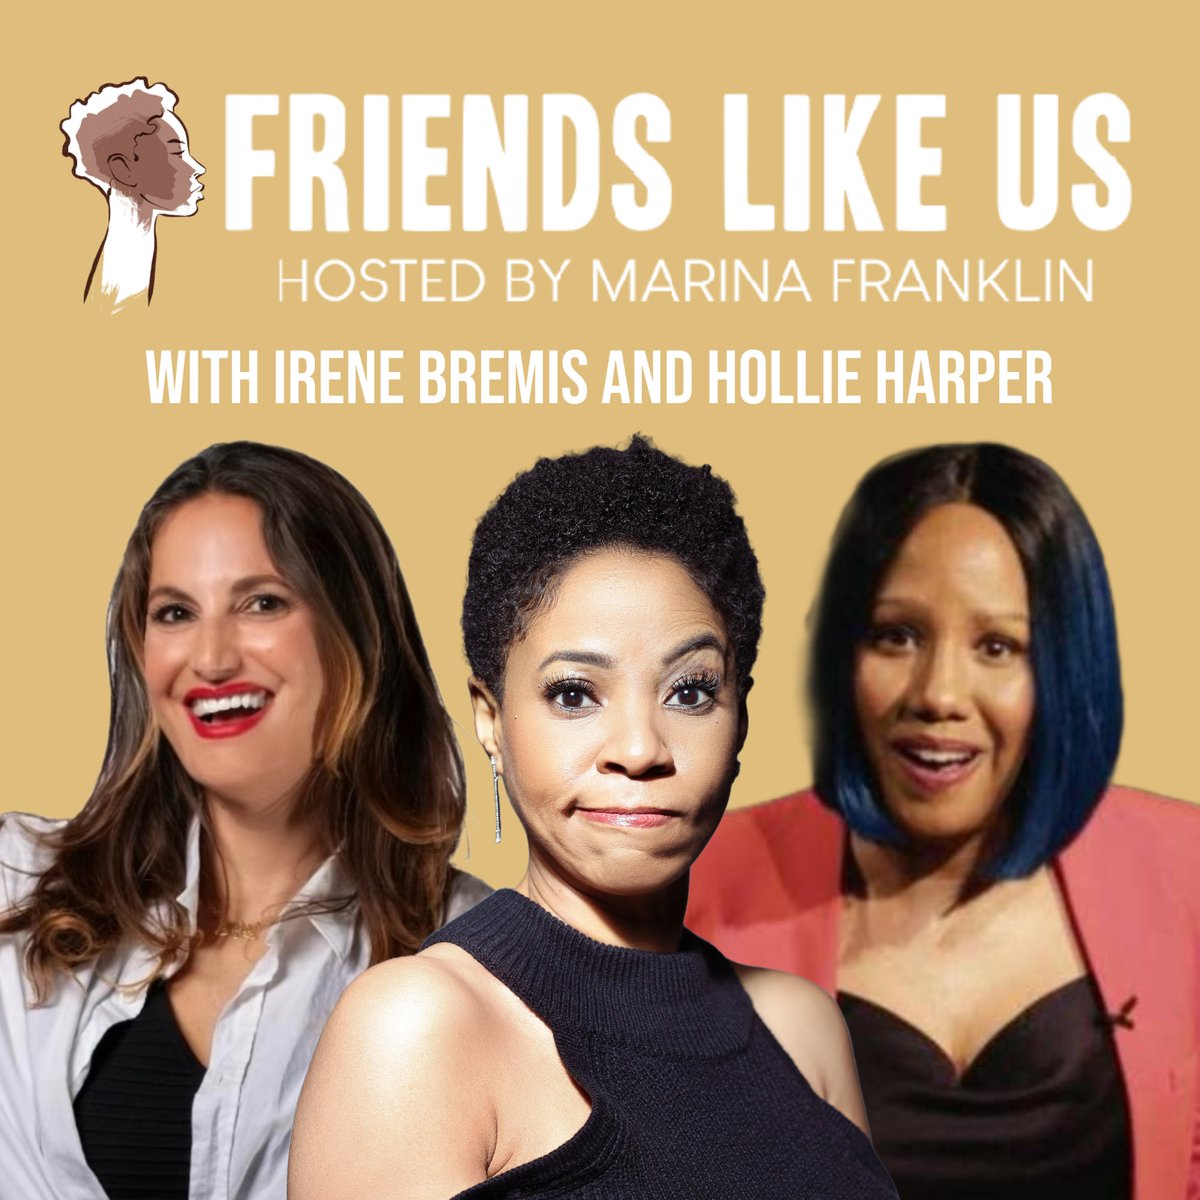 Don’t miss out on last week's episode of #FriendsLikeUs where host @marinayfranklin was joined by @HollieHarper5 @irenebremis13 #ListenNow and #subscribe here! ow.ly/qlYo50LXHK5 Review #FriendsLikeUs on #ApplePodcasts! linktr.ee/marinayfranklin